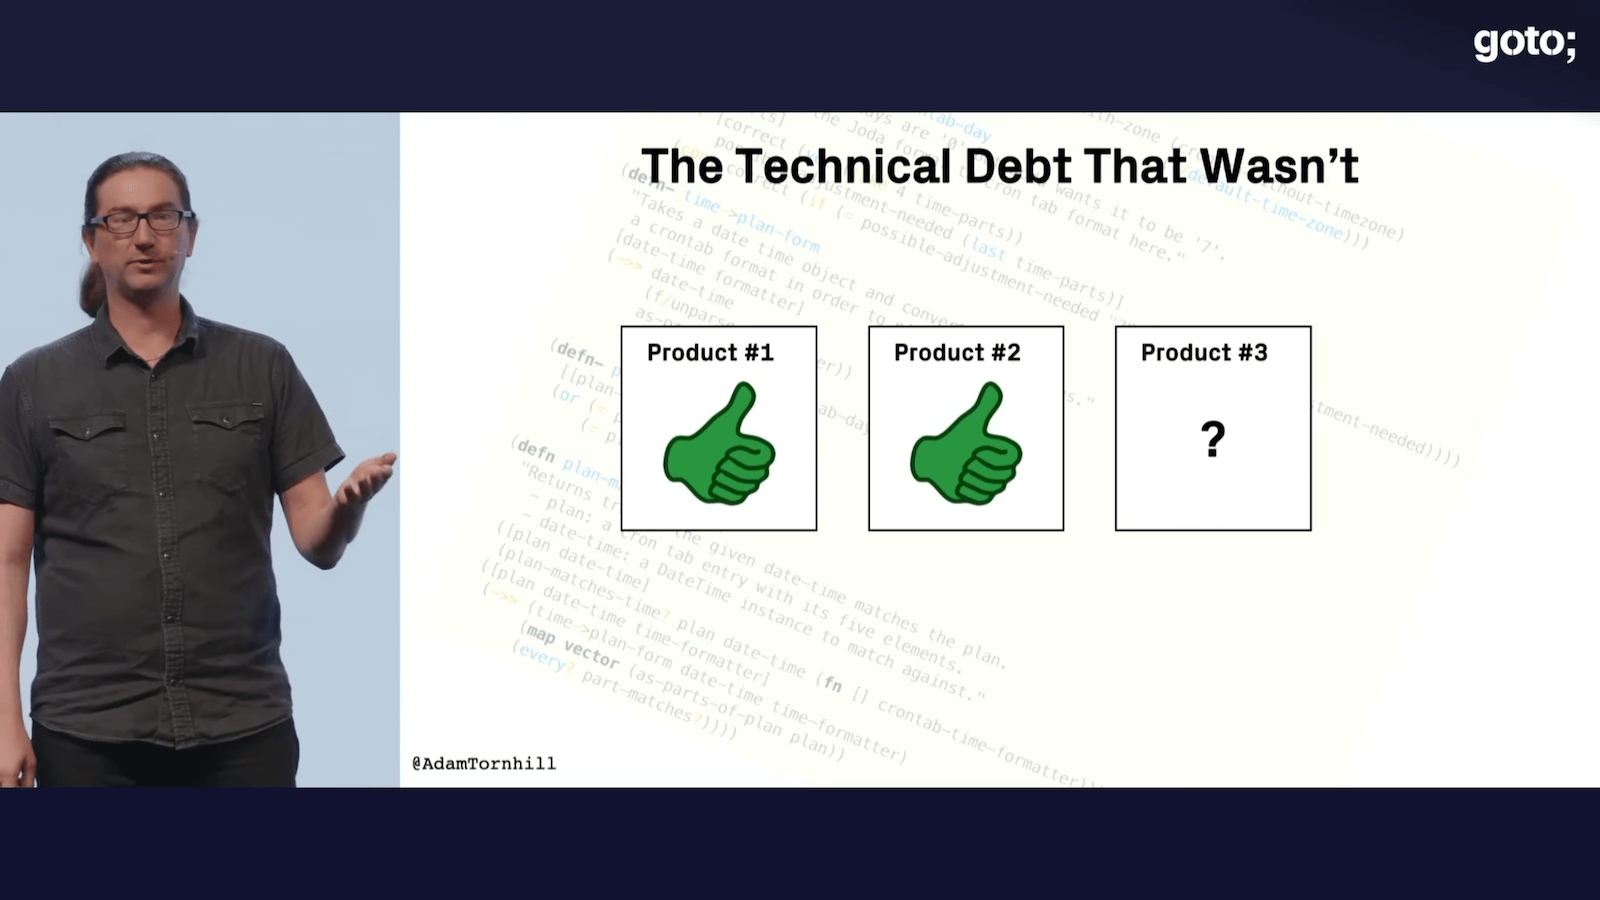 A snapshot from the video (21:15), with Adam Tornhill on the left and an illustration on the right labeled "The Technical Debt That Wasn't"